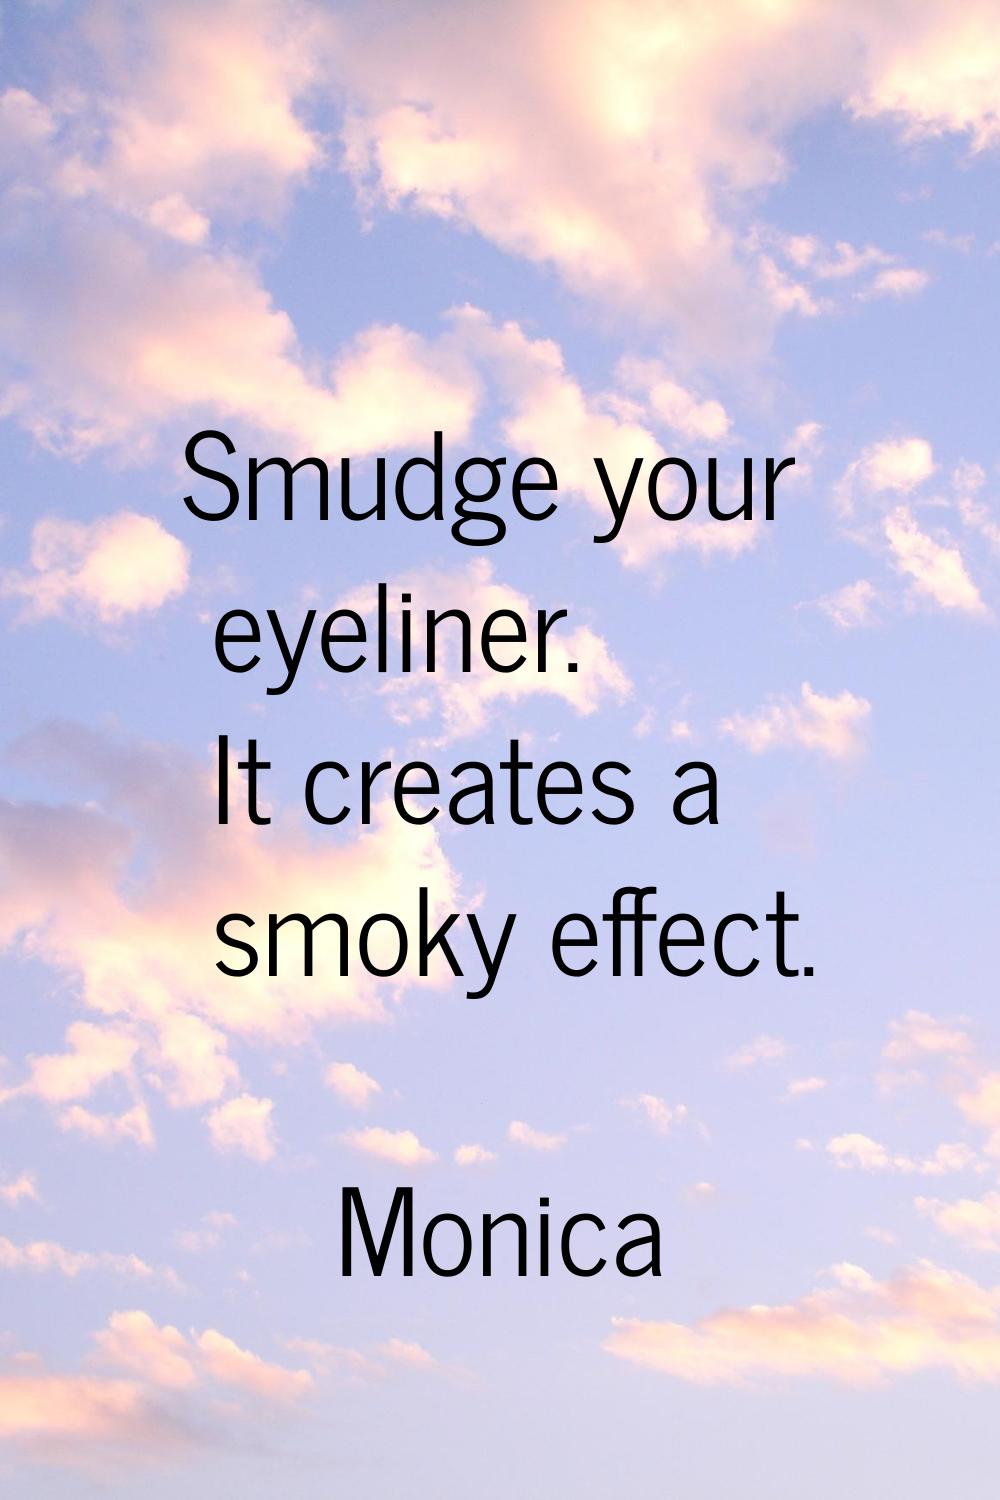 Smudge your eyeliner. It creates a smoky effect.